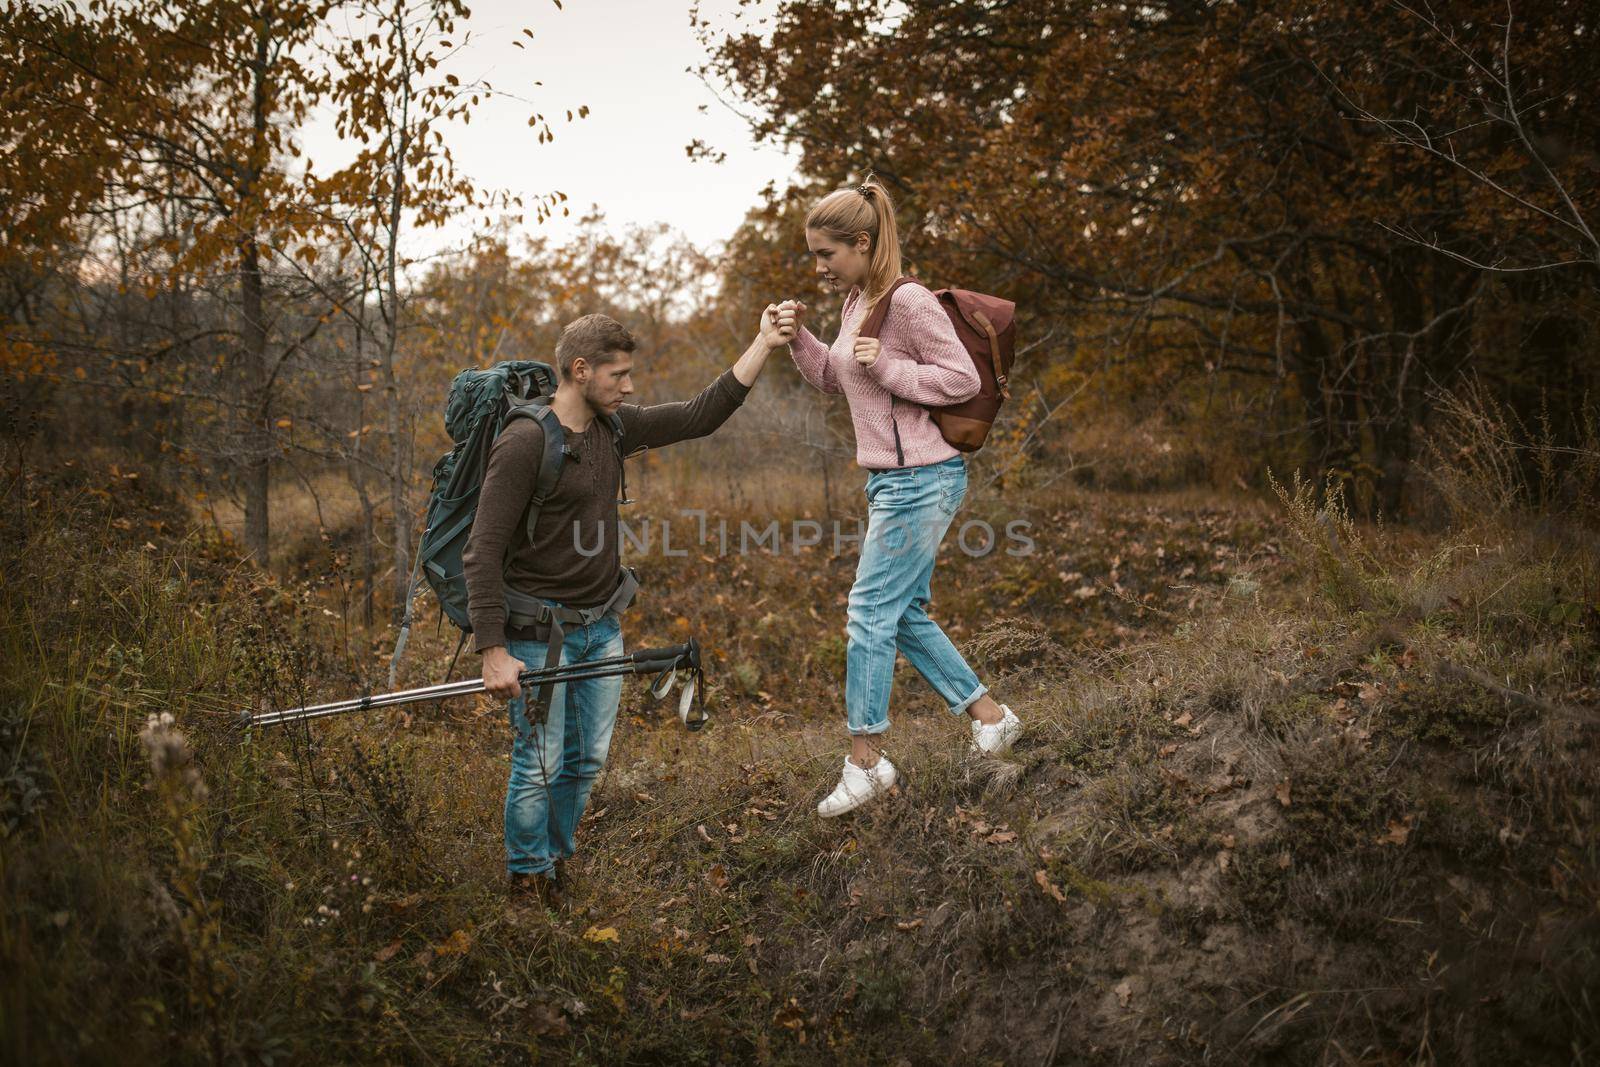 Hiking in nature. Young Man and Woman backpackers descend from the slope holding hands and holding hiking poles in their hands. Tourists with backpacks walk through the autumn forest. Support concept by LipikStockMedia